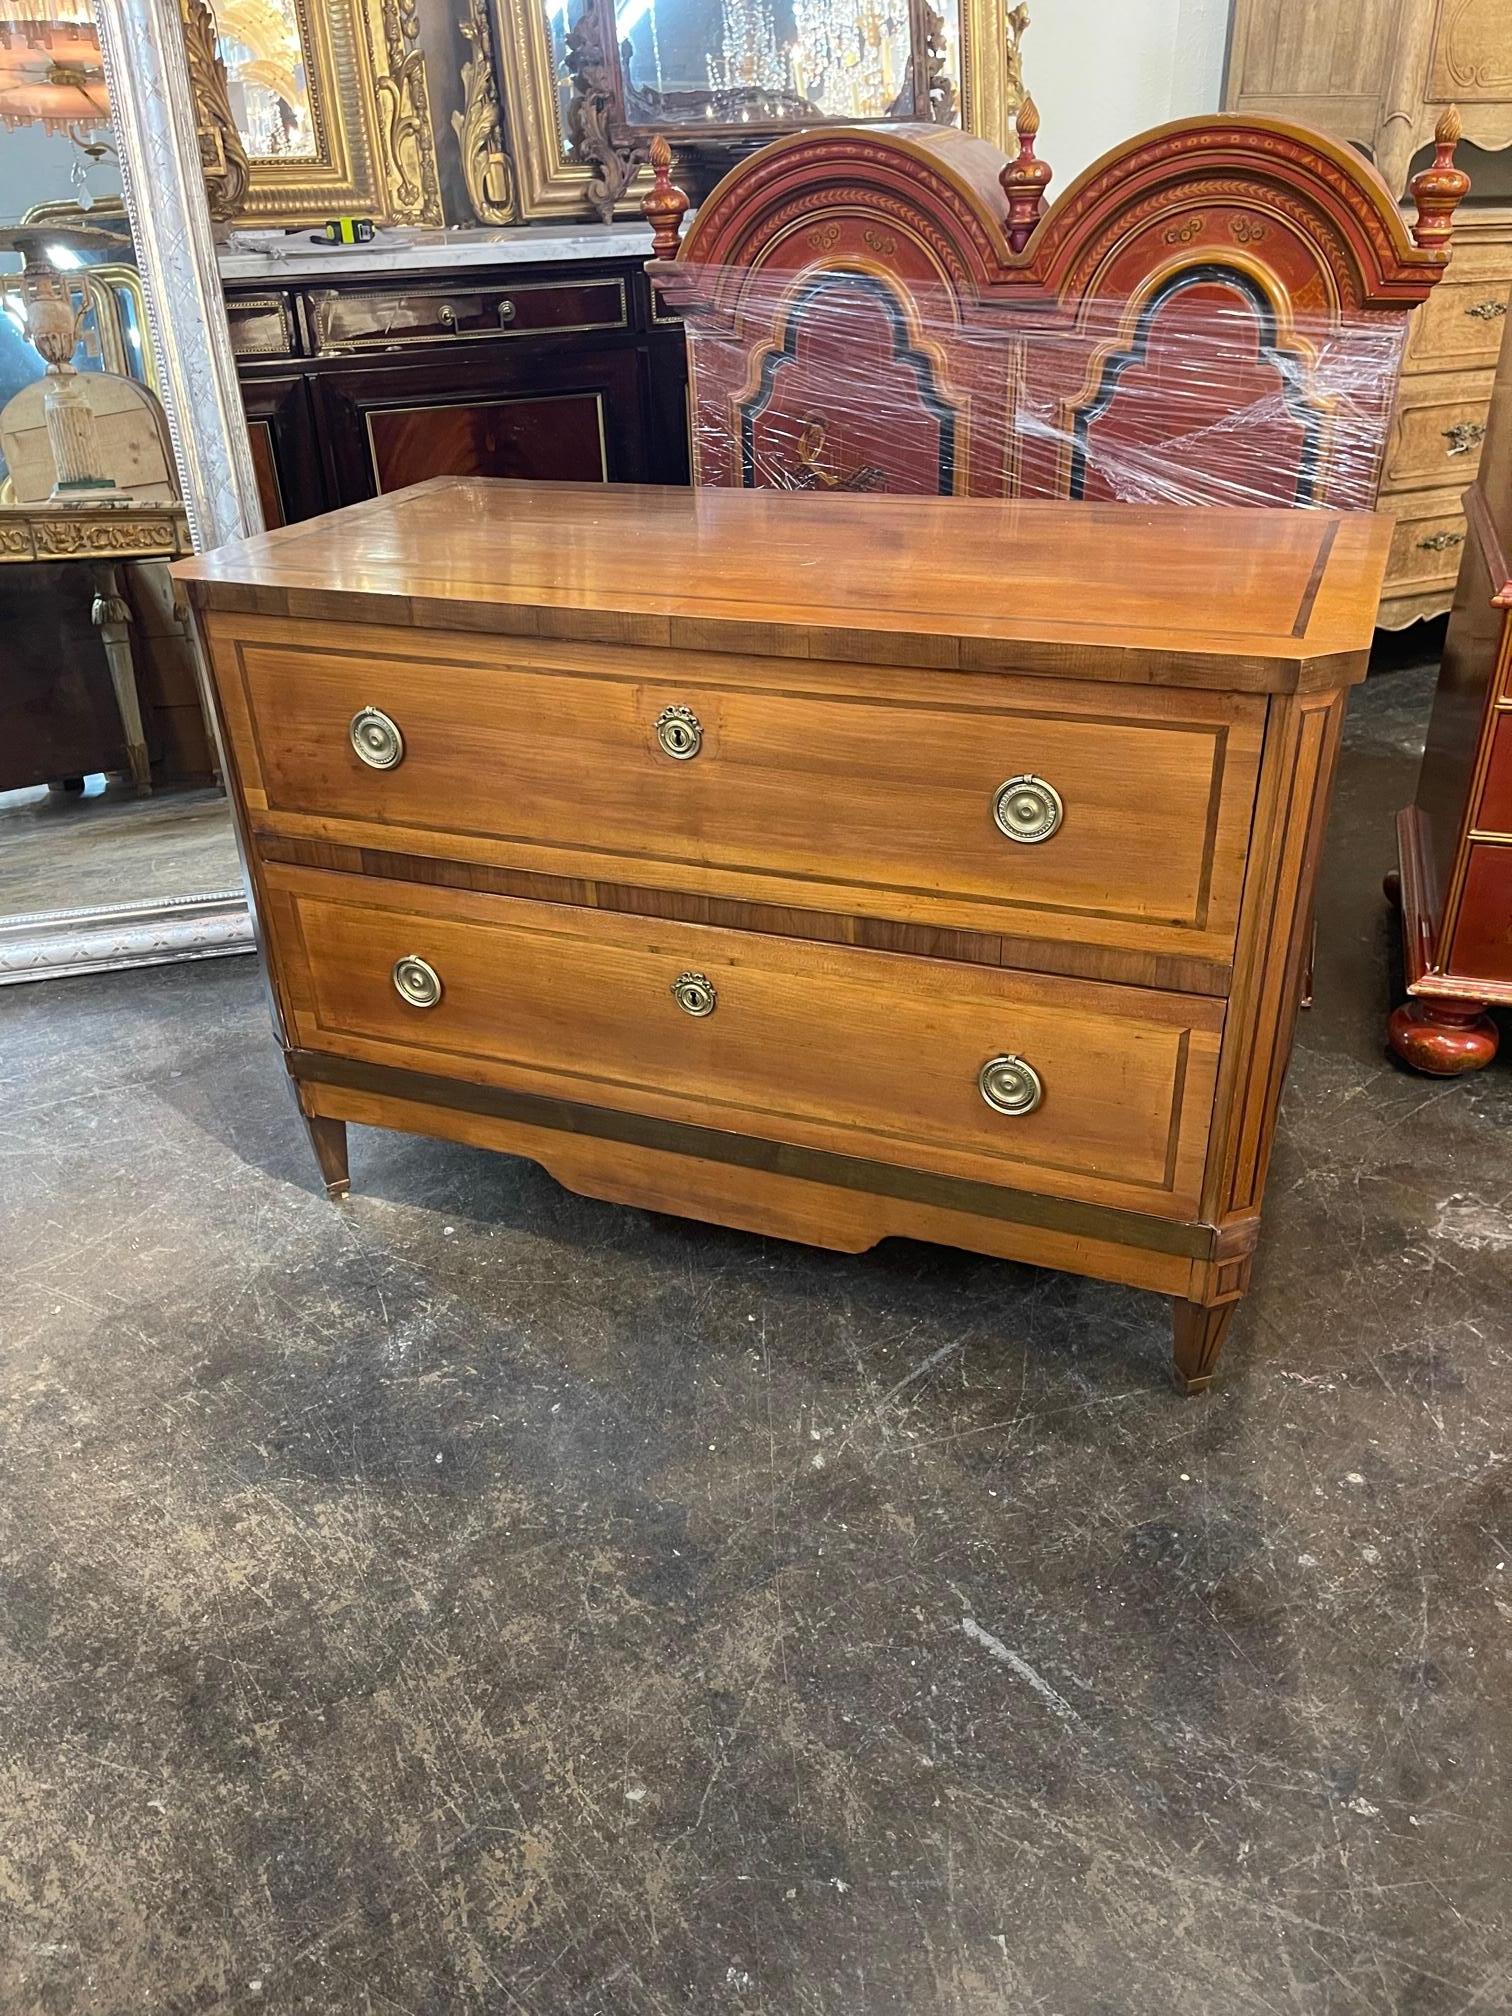 Handsome 19th century French Walnut commode. This piece has lovely clean lines and a very fine finish. Pretty hardware as well. Great for a variety of decors!